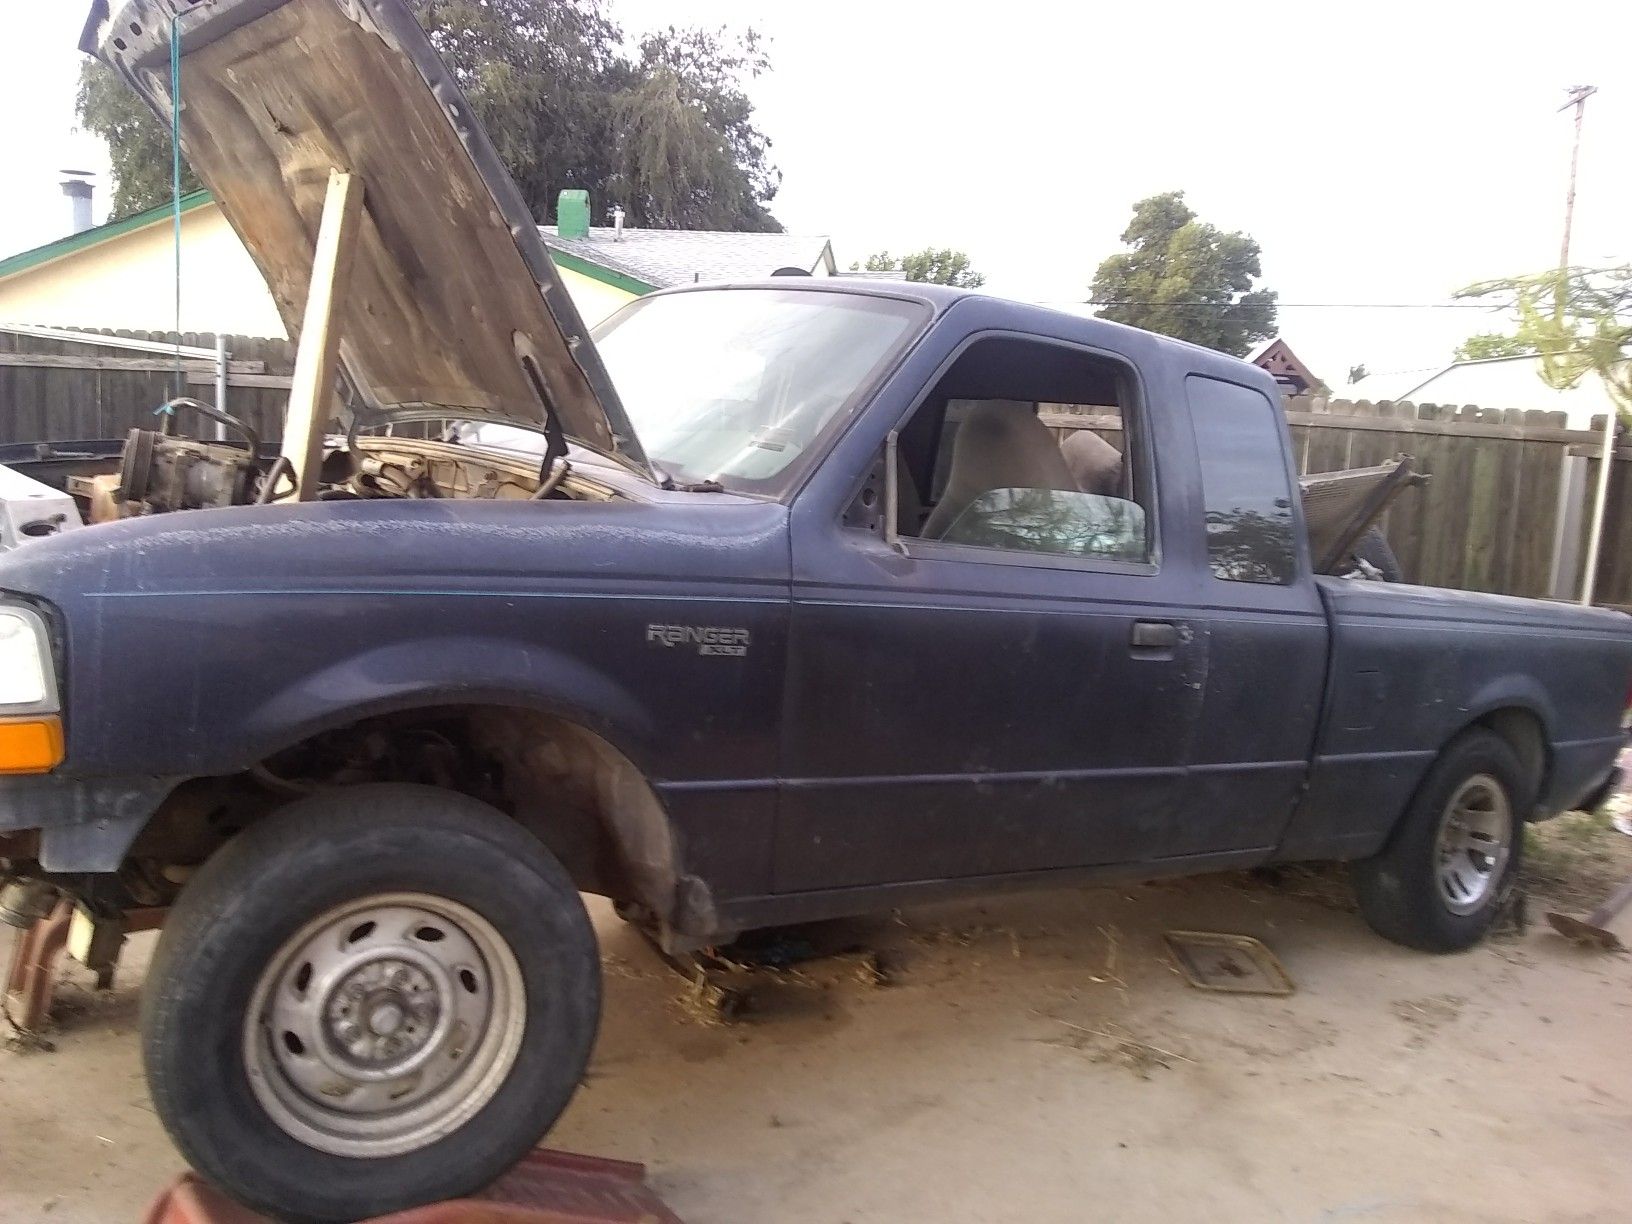 99 Ford ranger parts truck most take all